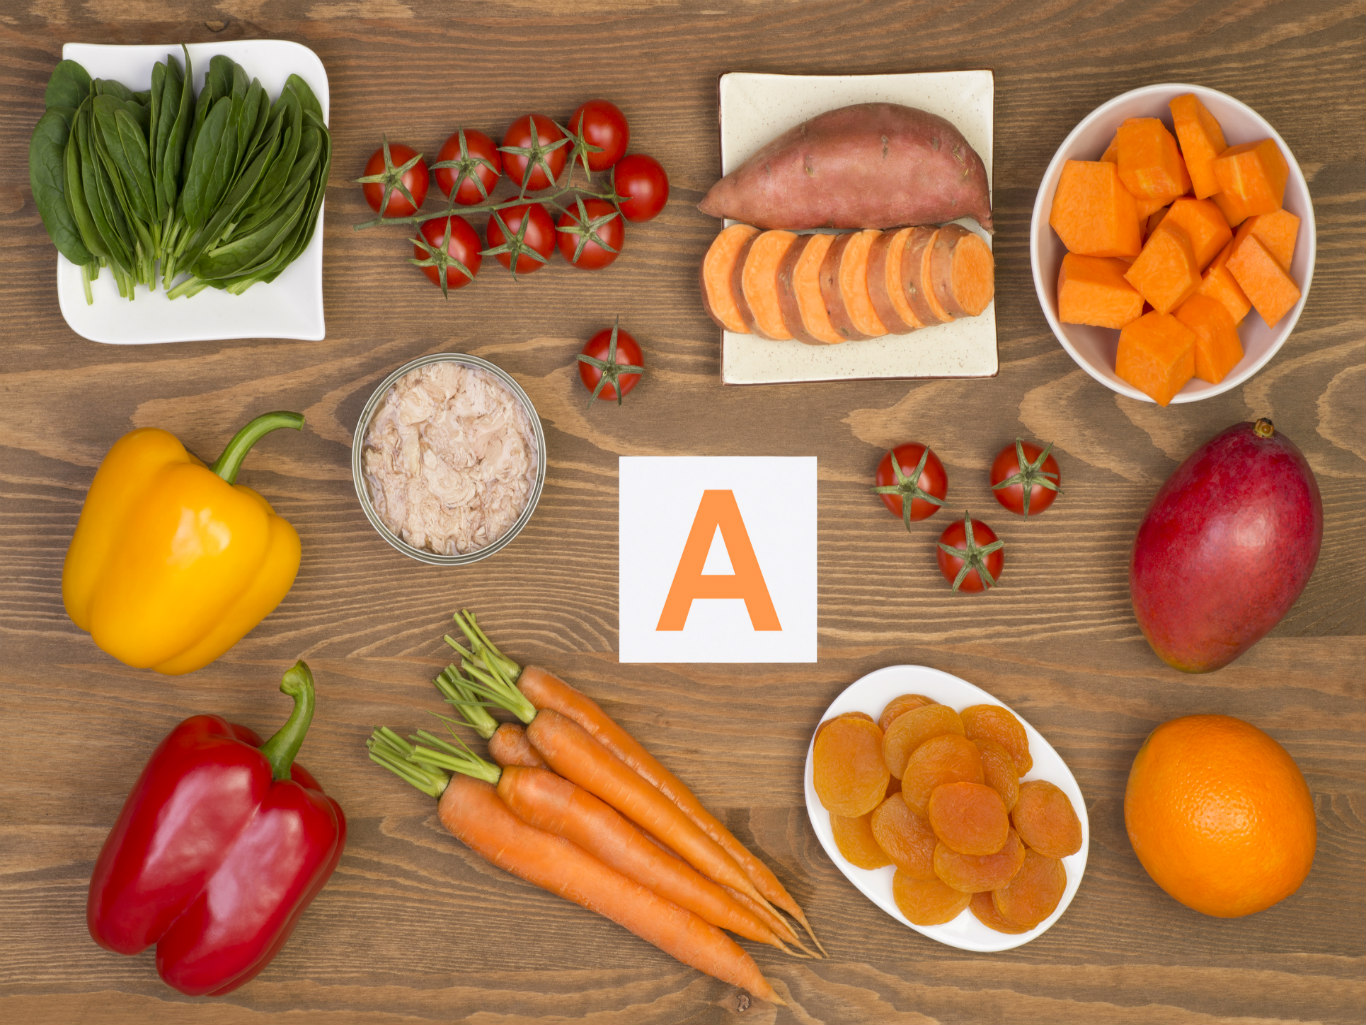 What foods contain vitamin A